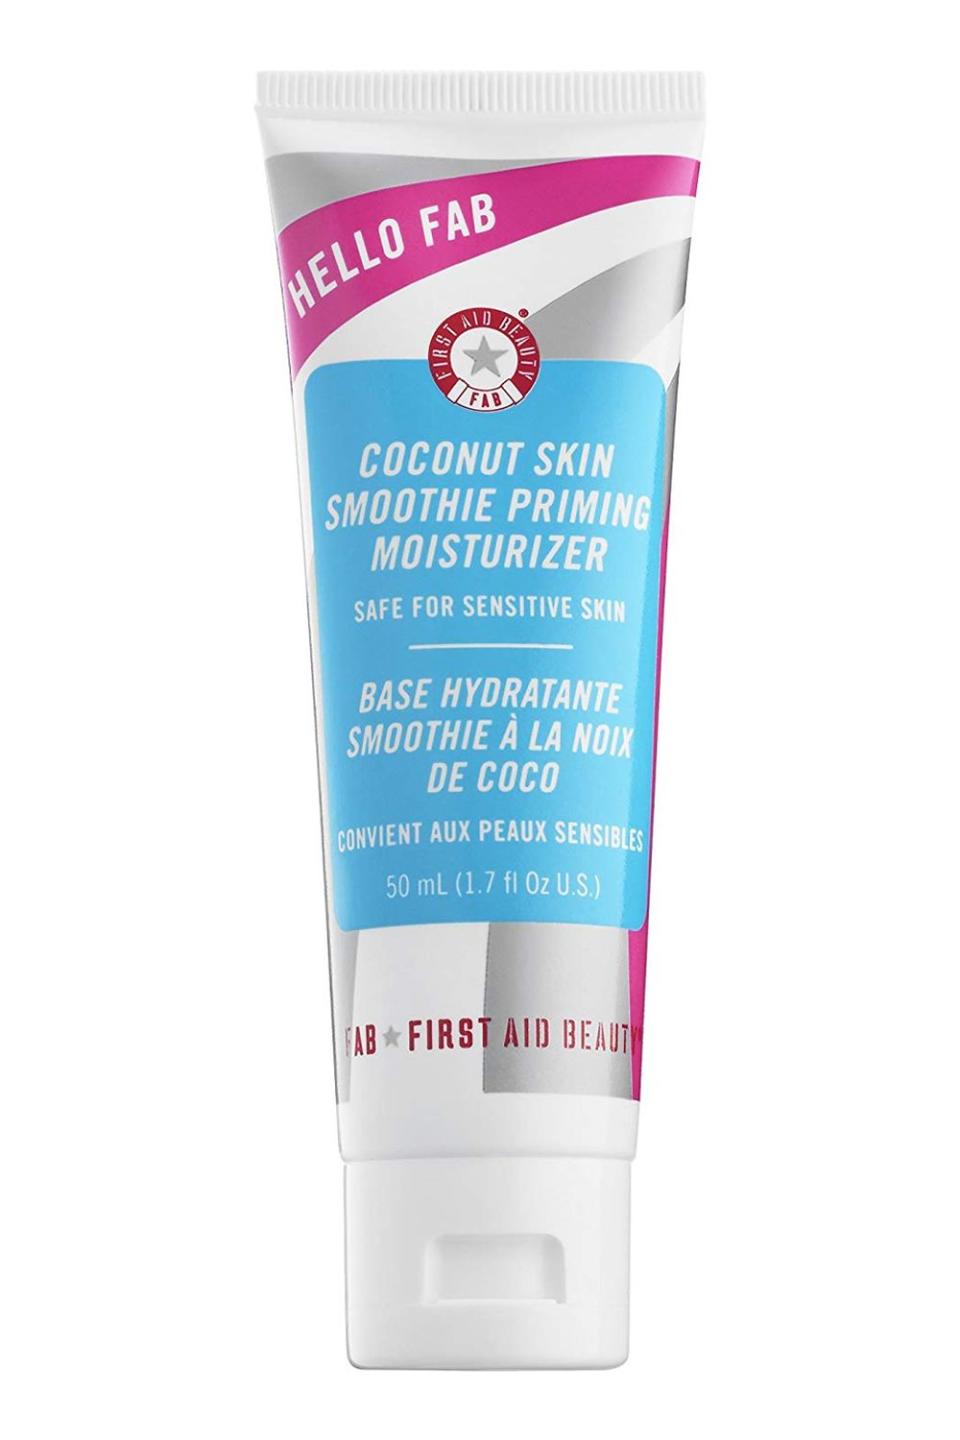 8) First Aid Beauty Coconut Skin Smoothie Priming Moisturizer